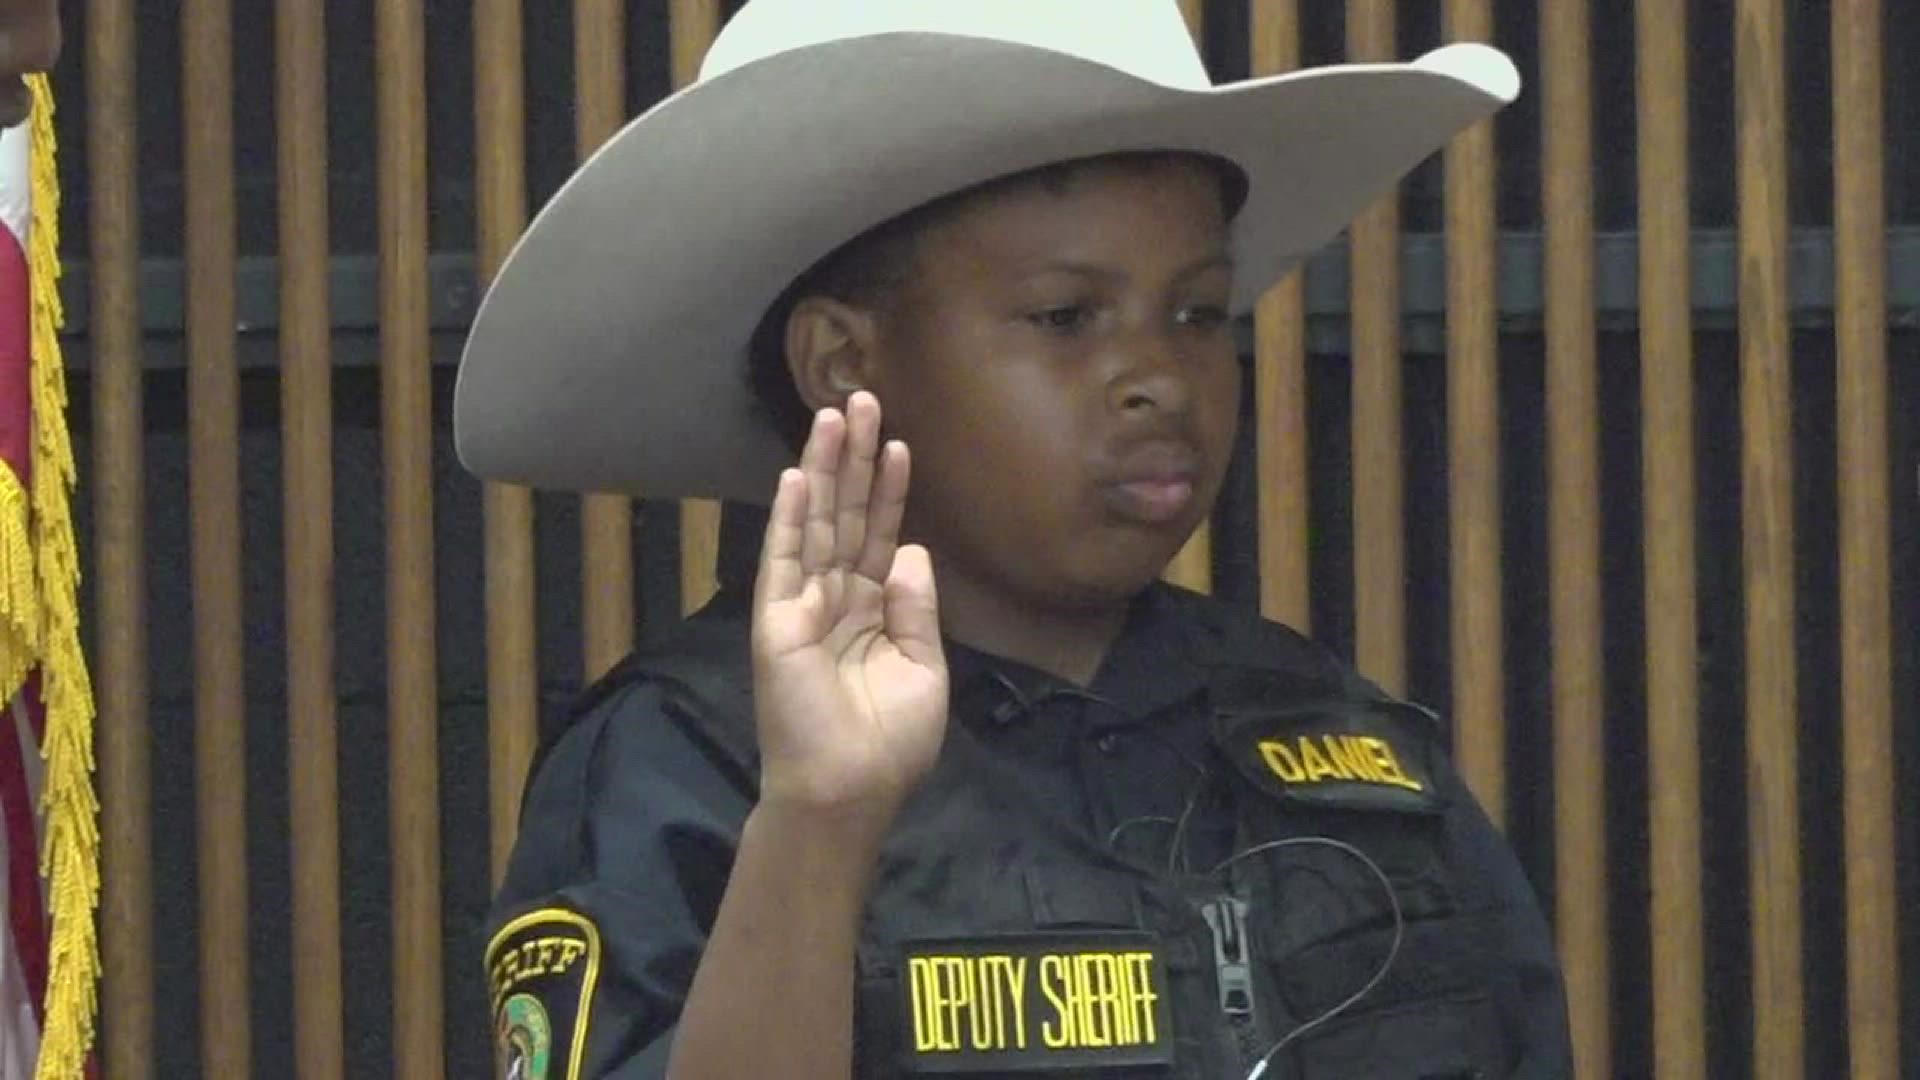 16 different agencies swore in the young officer.